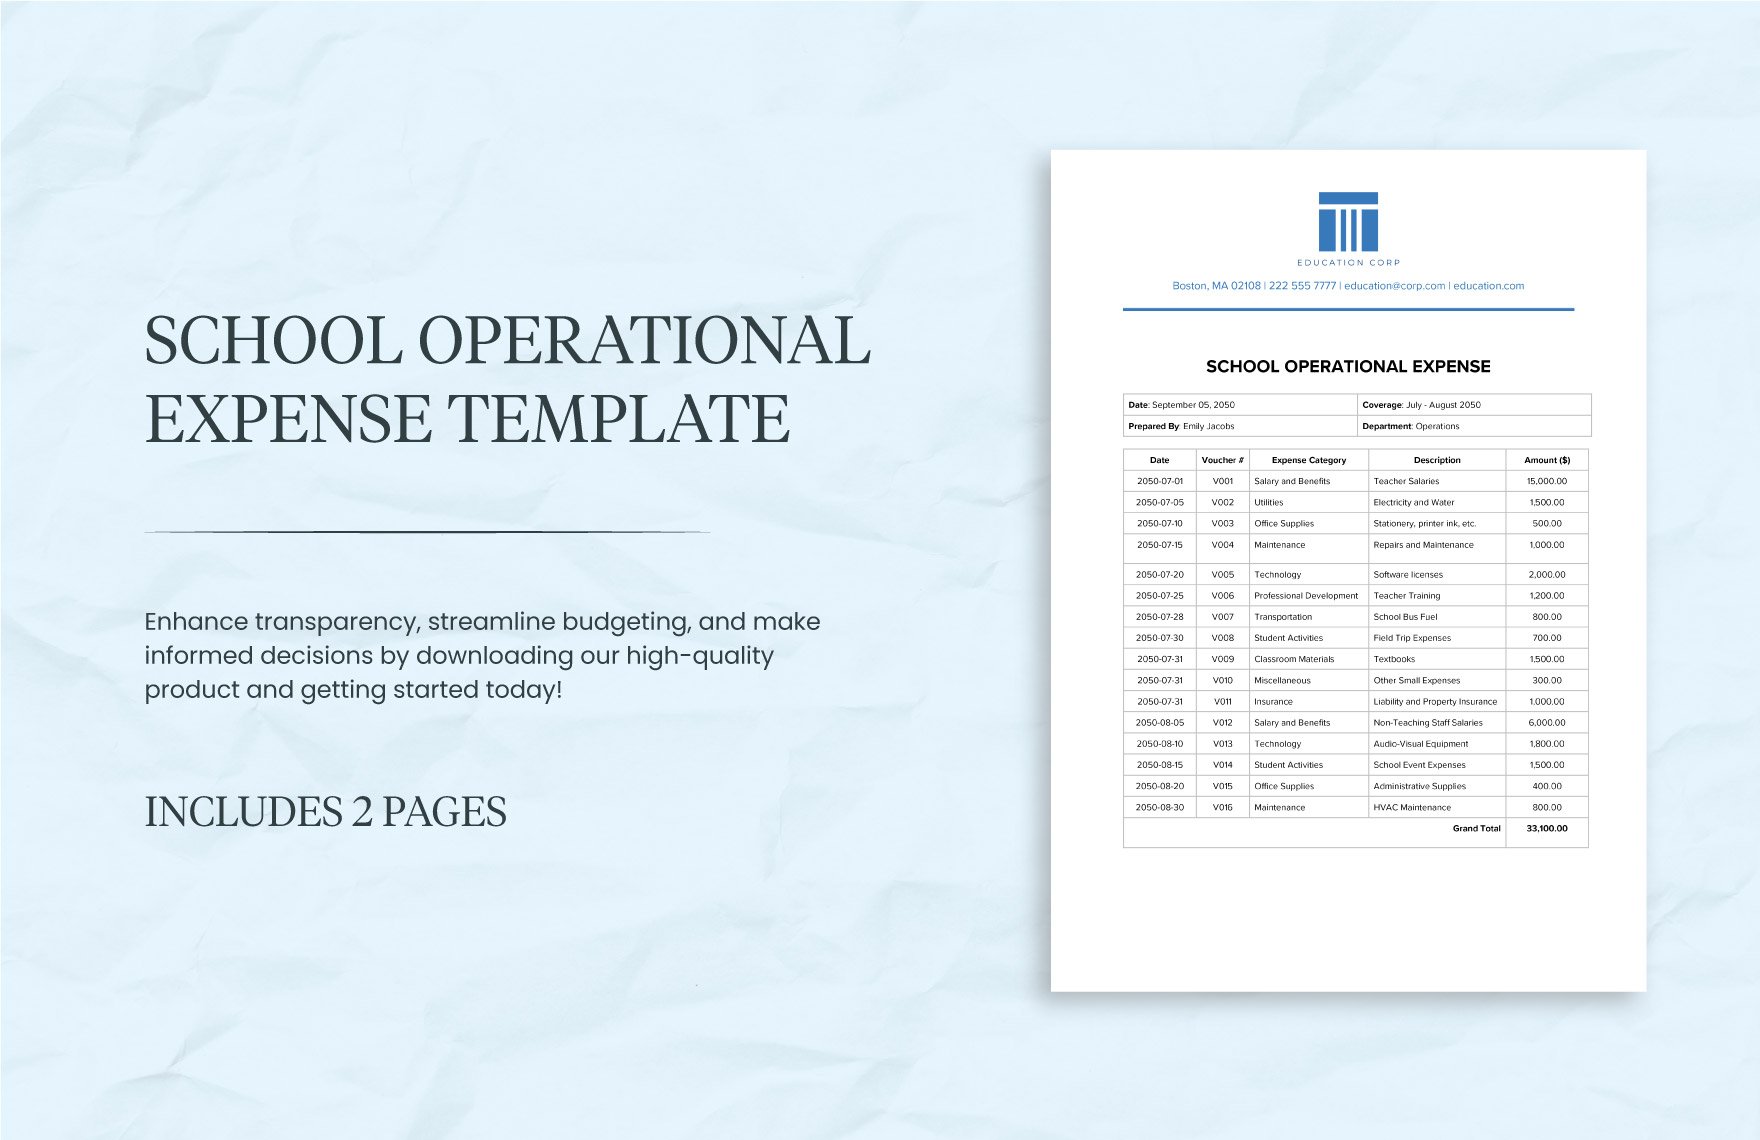 School Operational Expense Template in Word, Google Docs, PDF